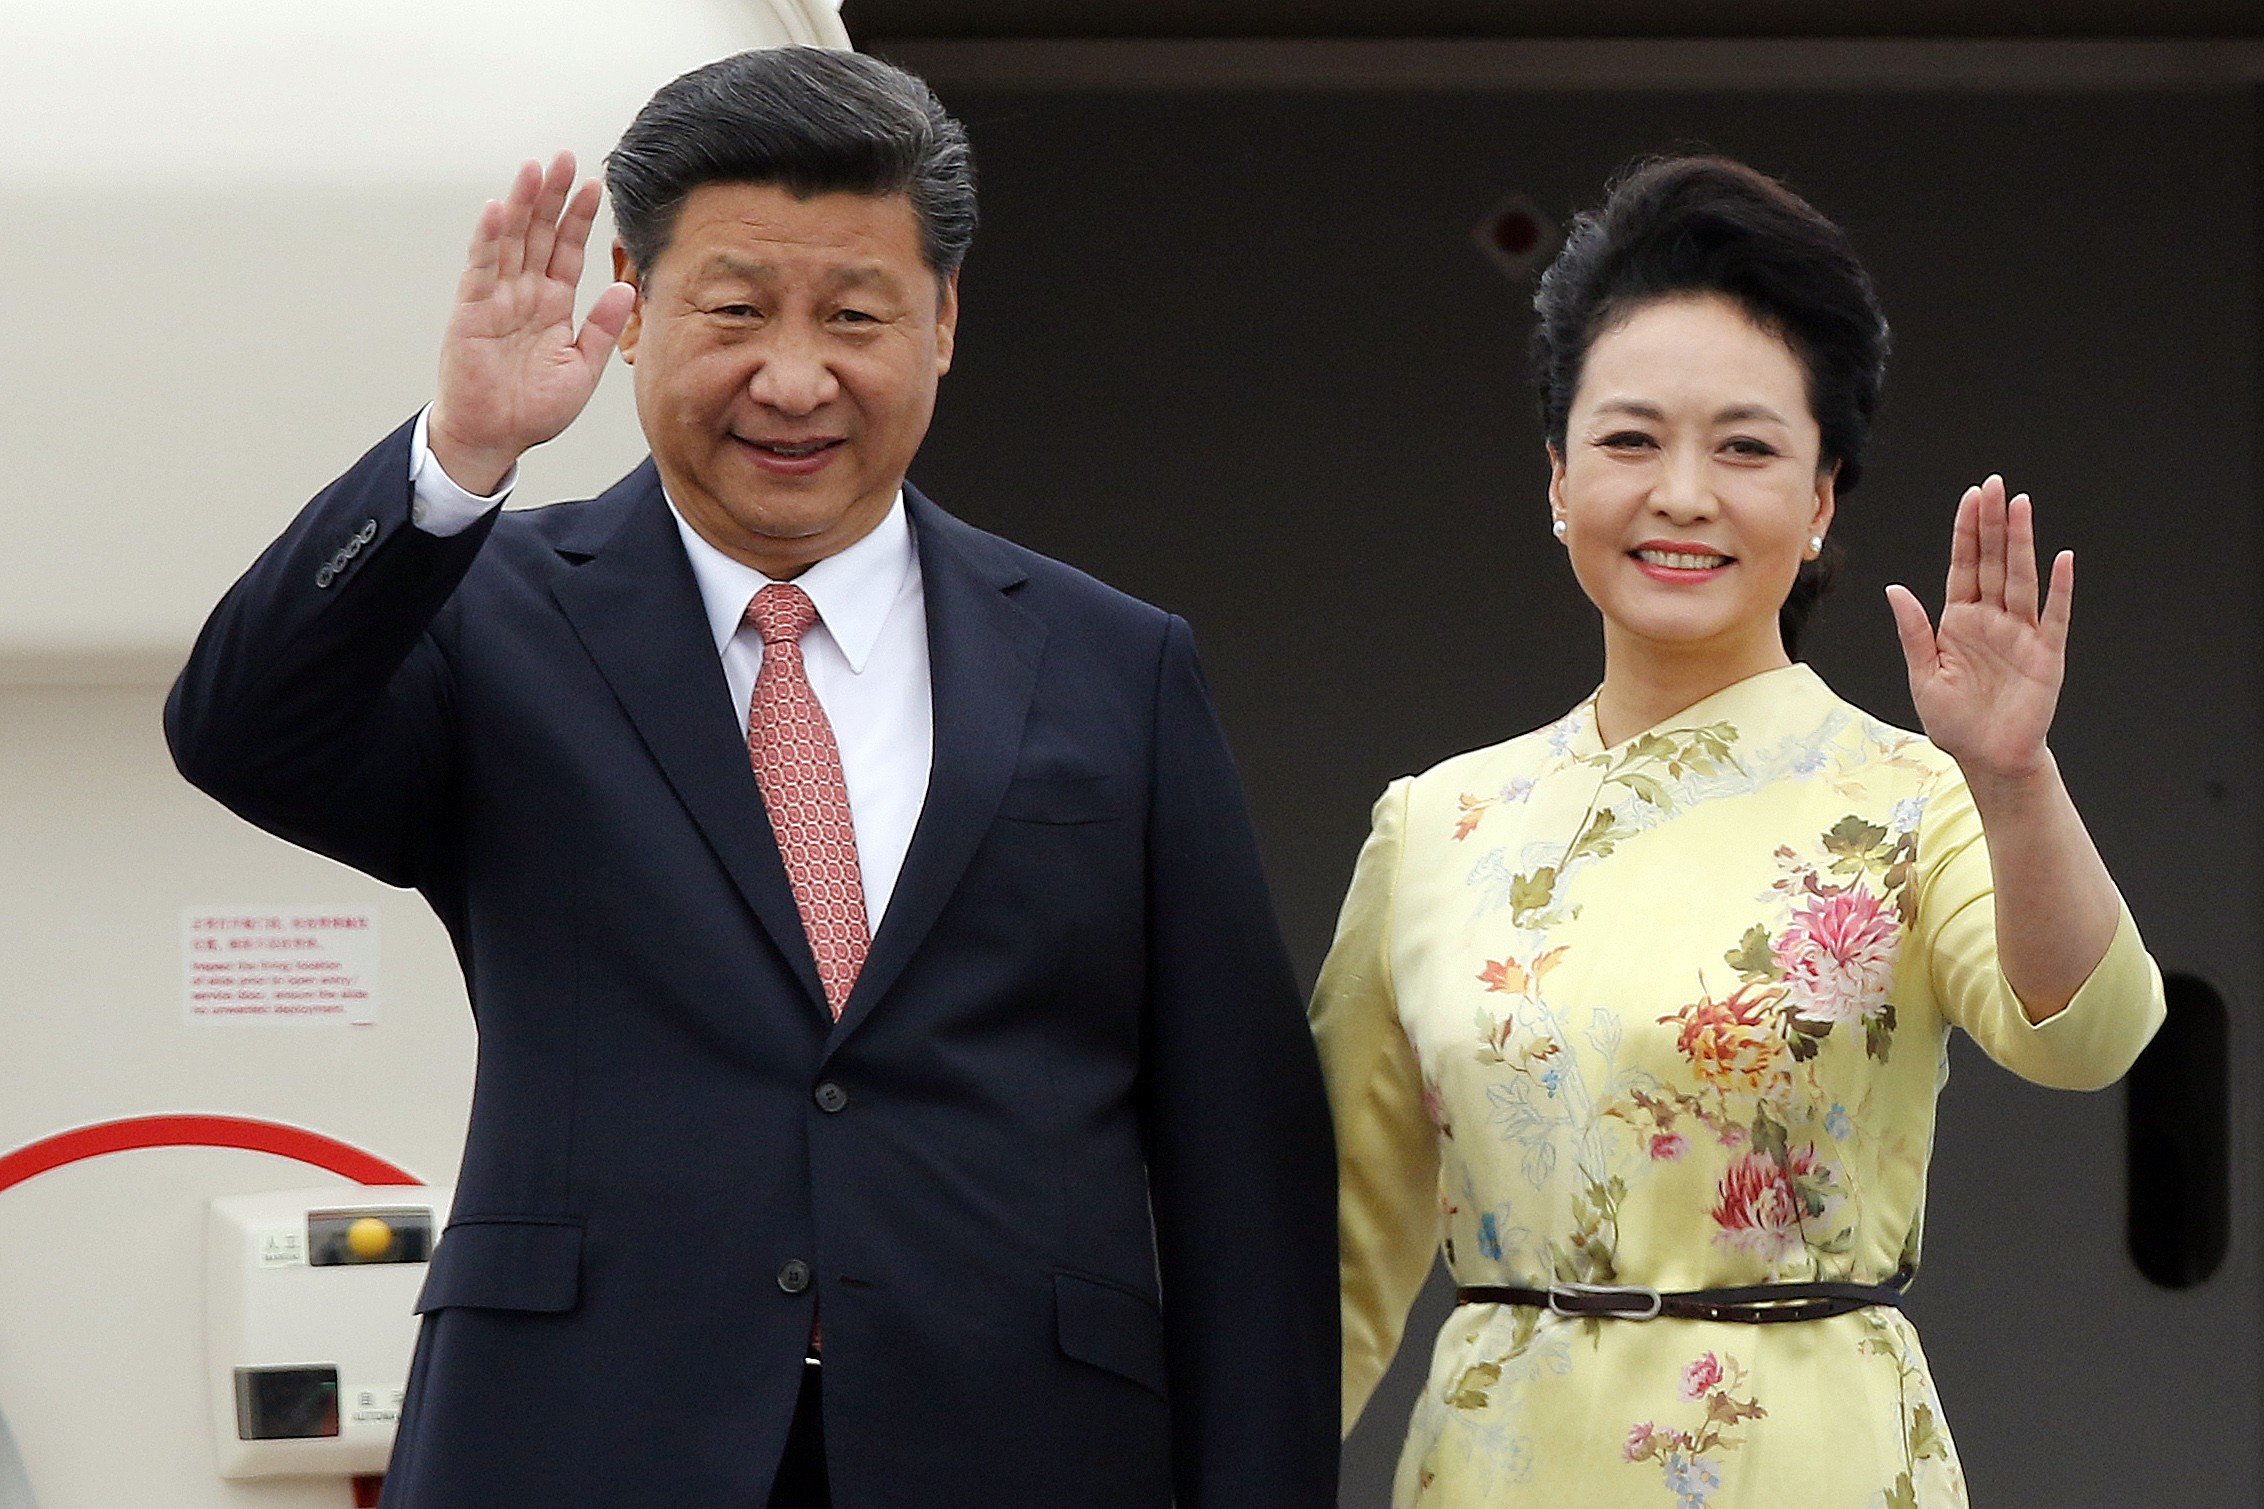 Chinese president Xi Jinping and first lady Peng Liyuan have arrived in Hong Kong to mark the 20th anniversary of the city’s handover to China. We take a look at Peng’s favourite looks and statement pieces